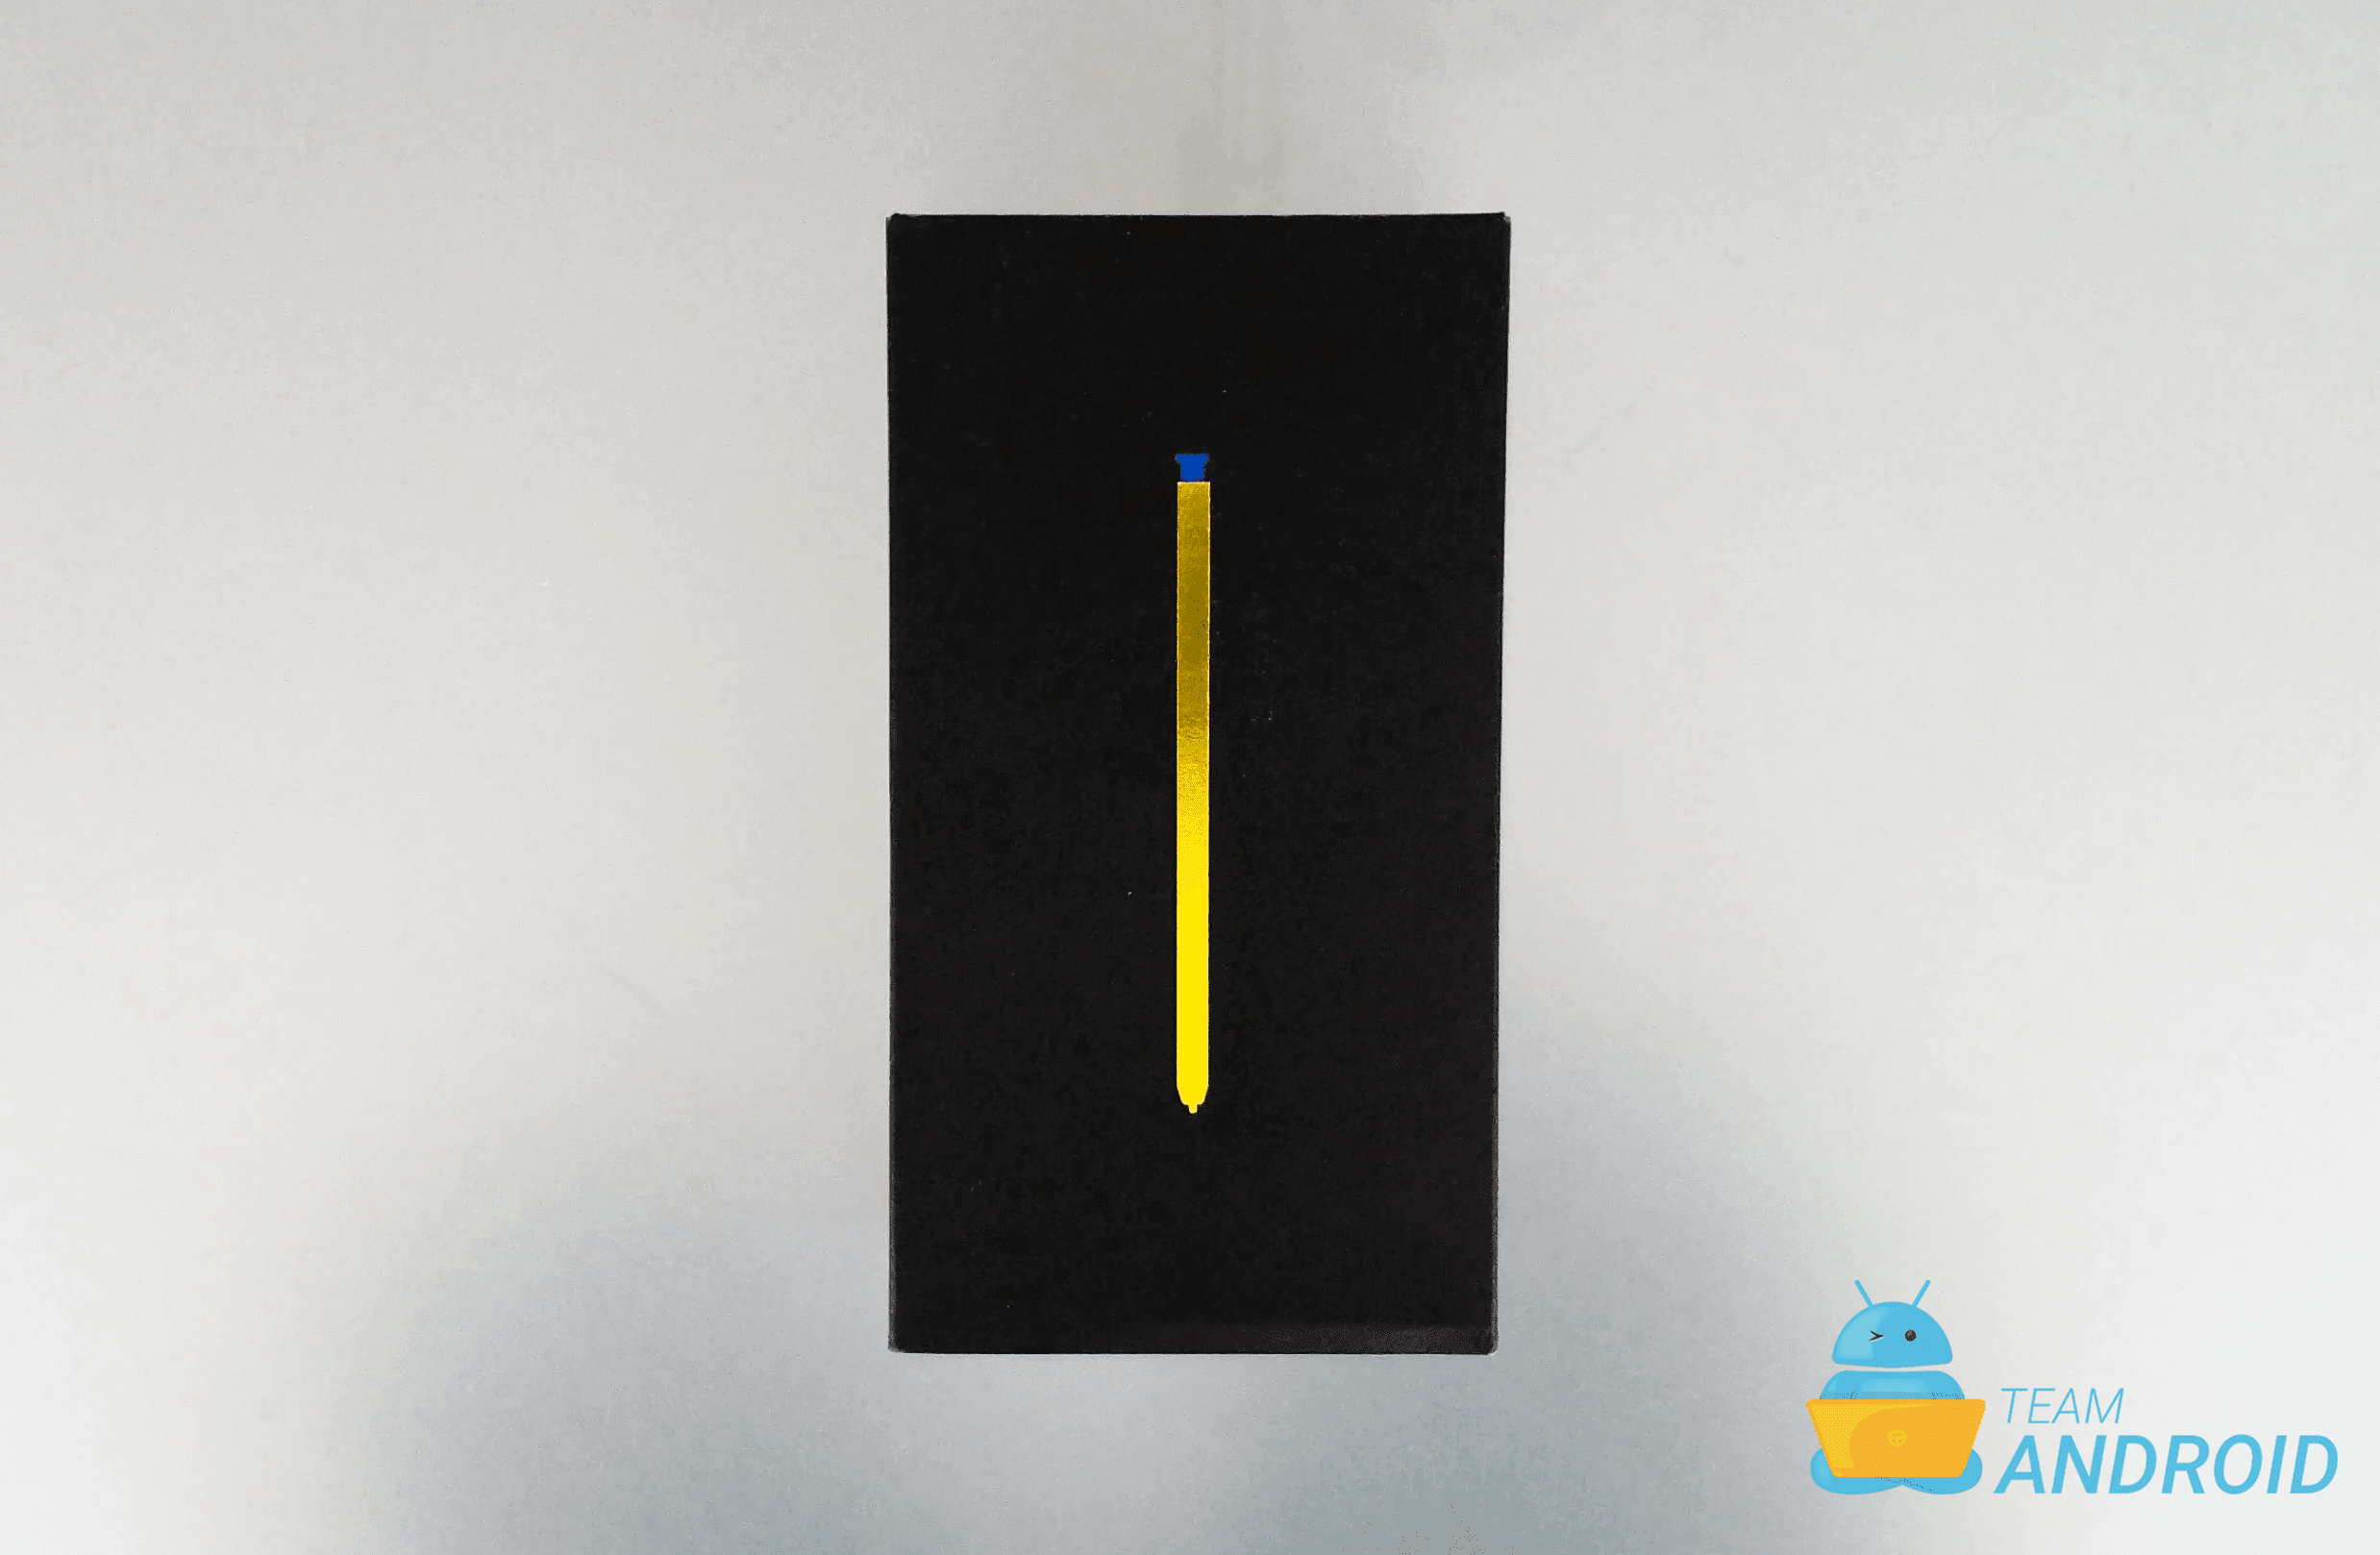 Galaxy Note 9 Box / Packaging